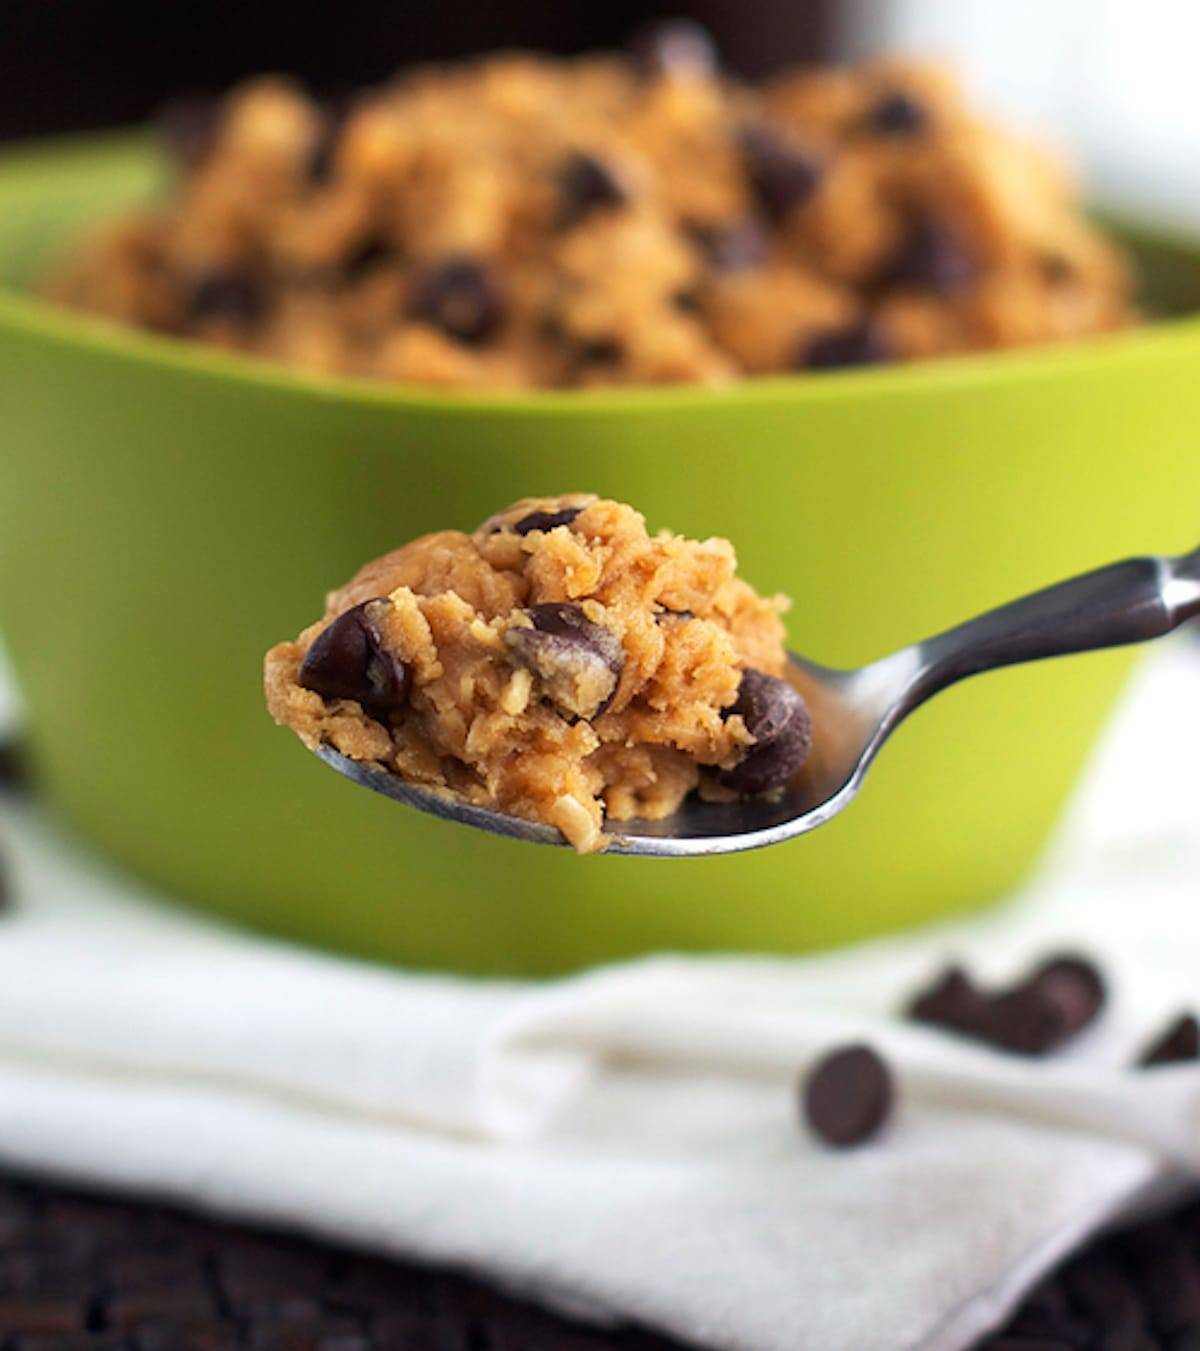 Chocolate chip peanut butter healthy cookie dough on a spoon in front of a green bowl.